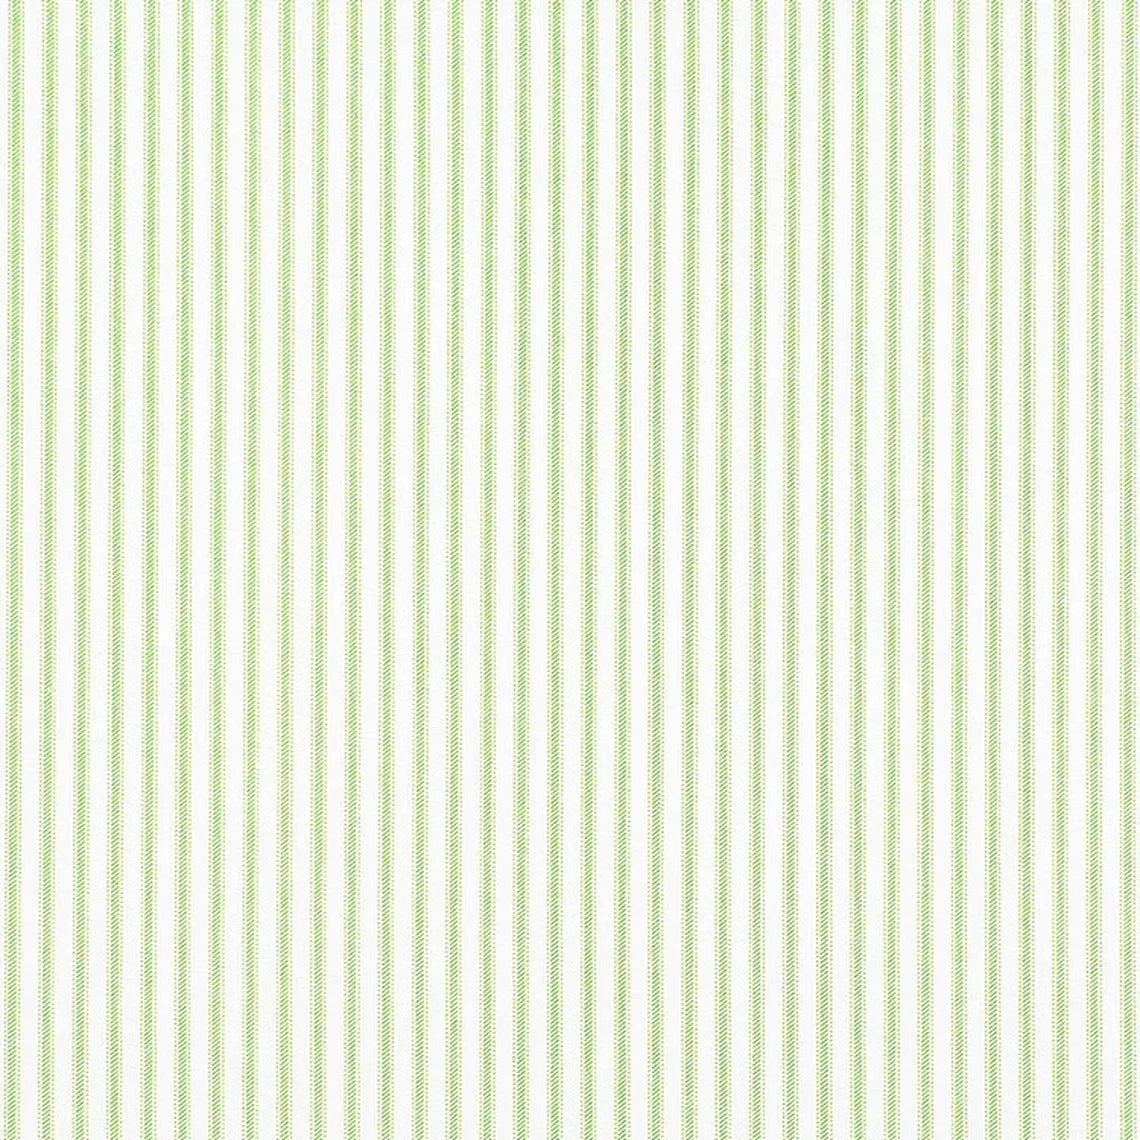 pinch pleated curtains in classic kiwi green ticking stripe on white